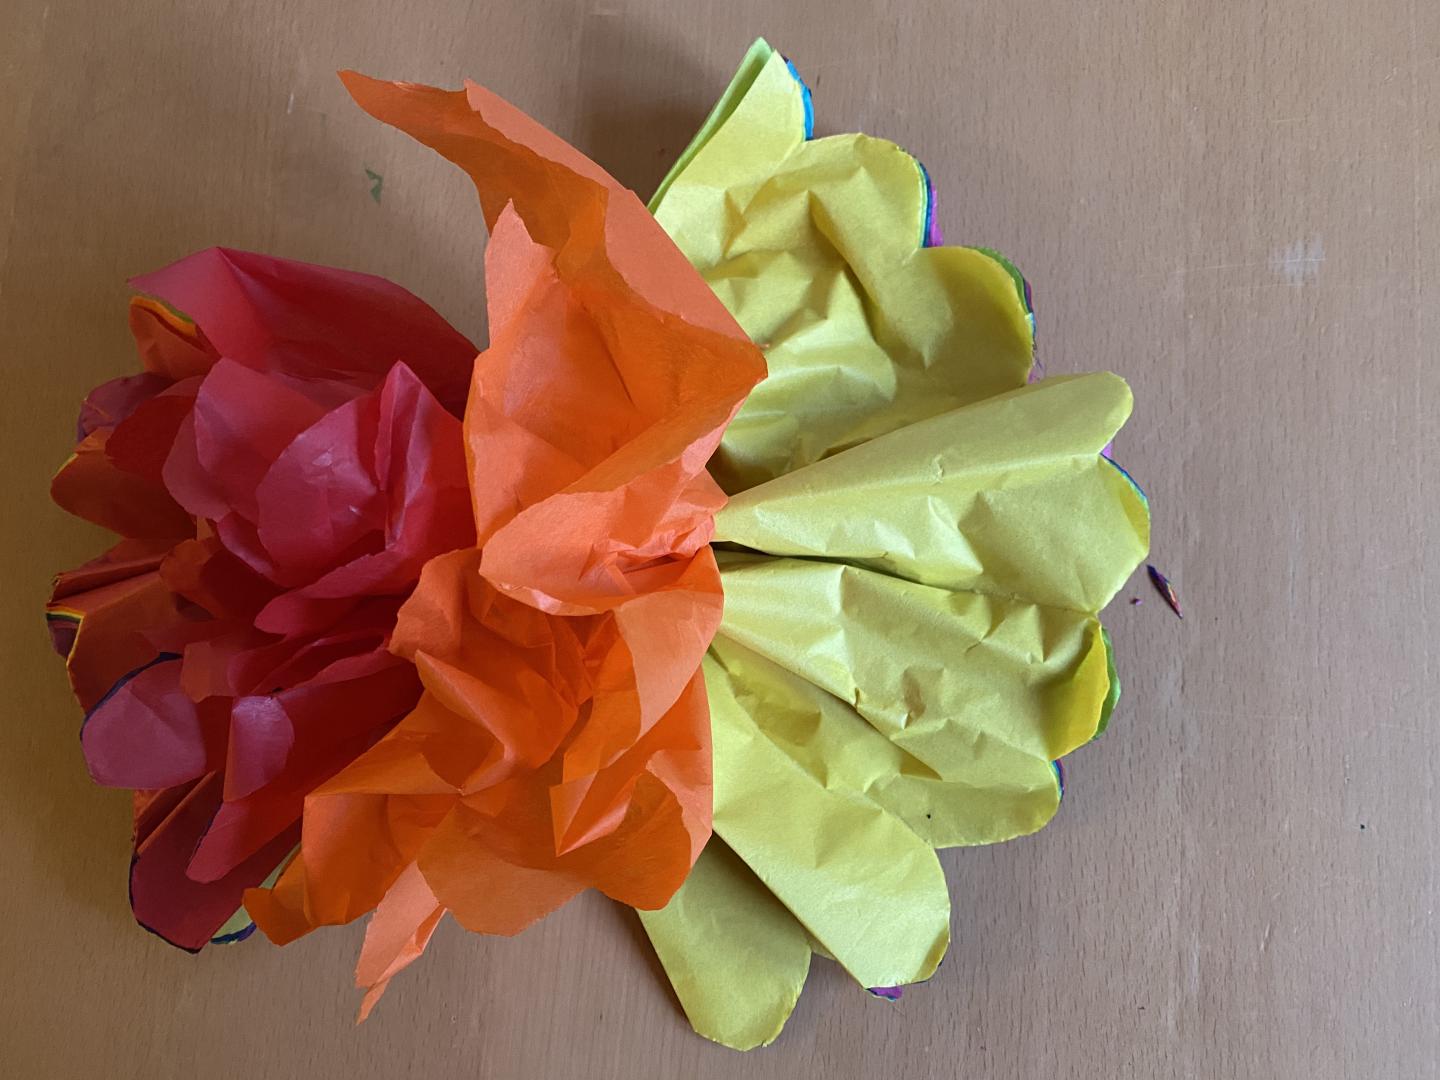 Coloured pom pom with pulled up layers of tissue paper